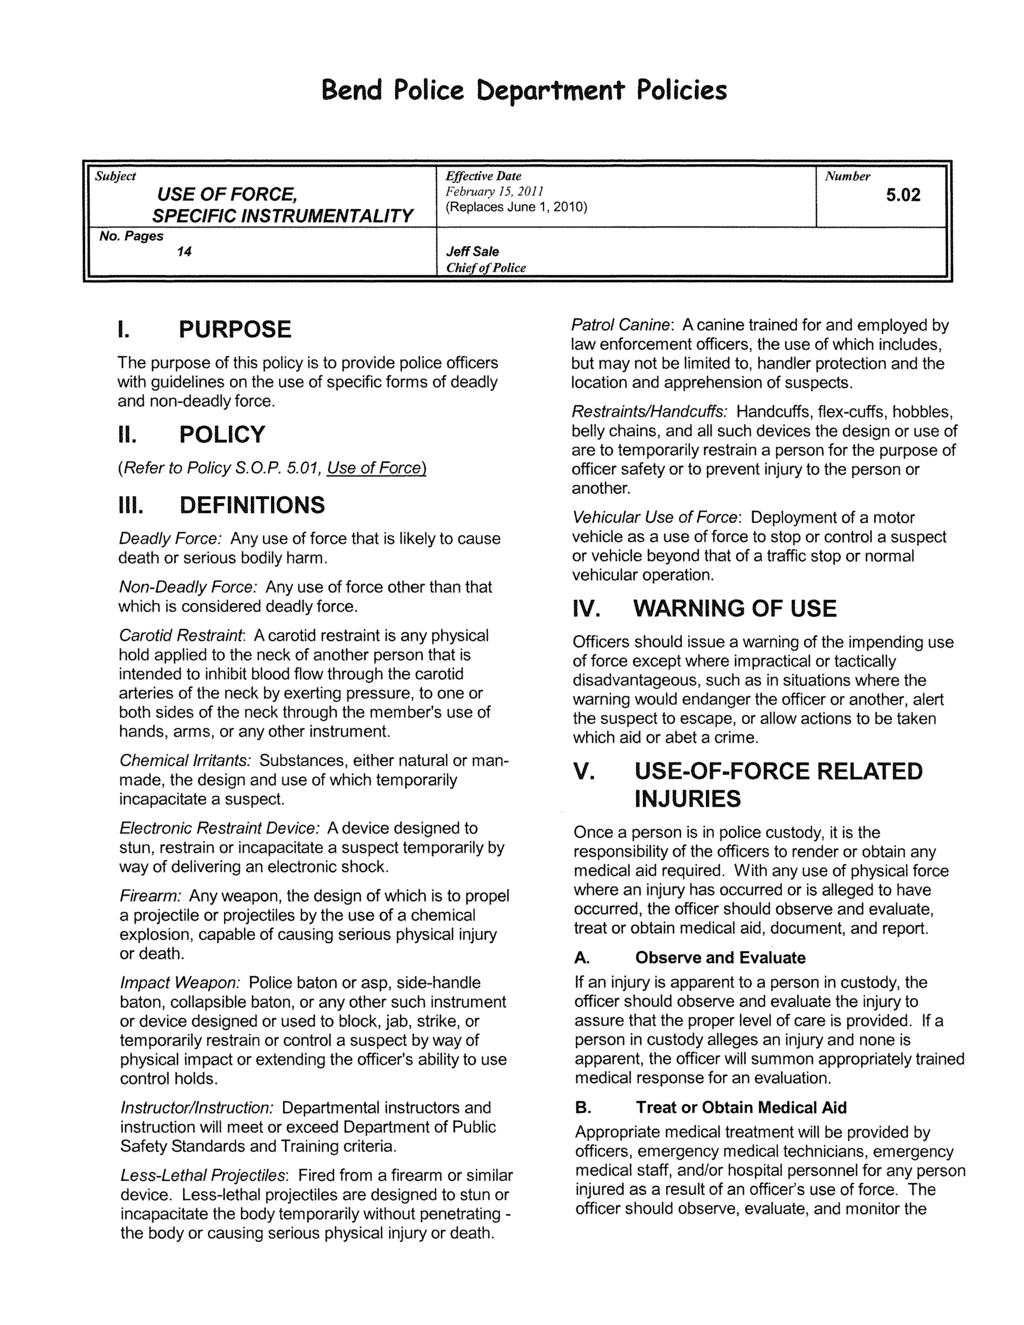 Bend Pol ice Department Policies Subject Effective Date Number Februwy 15, 2011 (Replaces June 1, 201 0) No. Pages USE OF FORCE, 5.02 SPECIFIC INSTRUMENTALITY 14 Jeff Sale Chief of Police I.